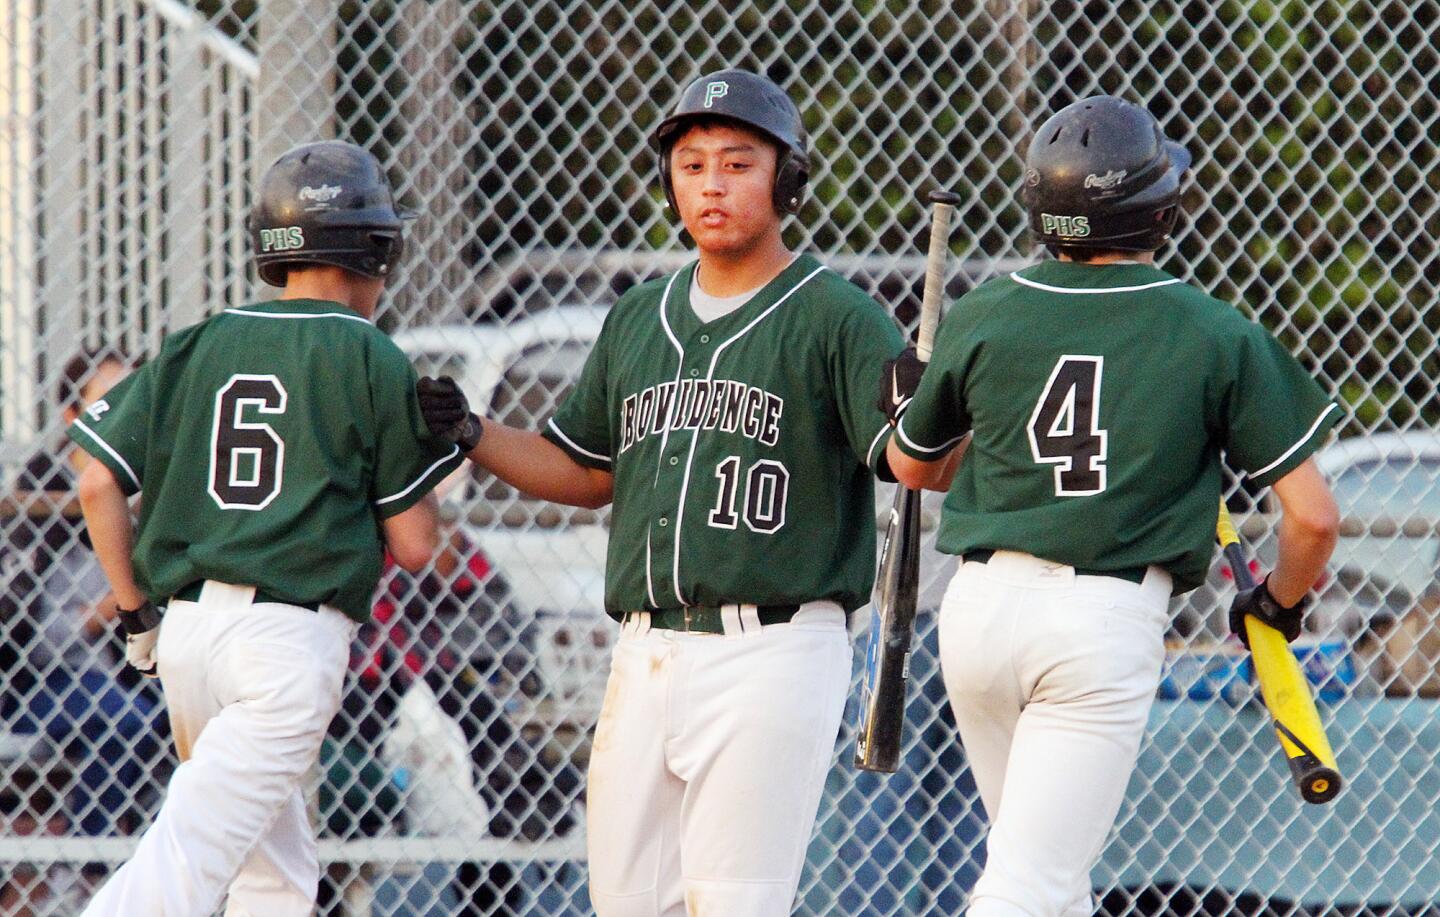 Providence's Mason Inumerable (10) fist bumps teammates Ryan Chow (6) and Thomas Keller (4) after they scored against Torah in a non-league baseball game at Ralph Foy Park in Burbank on Tuesday, March 11, 2014.